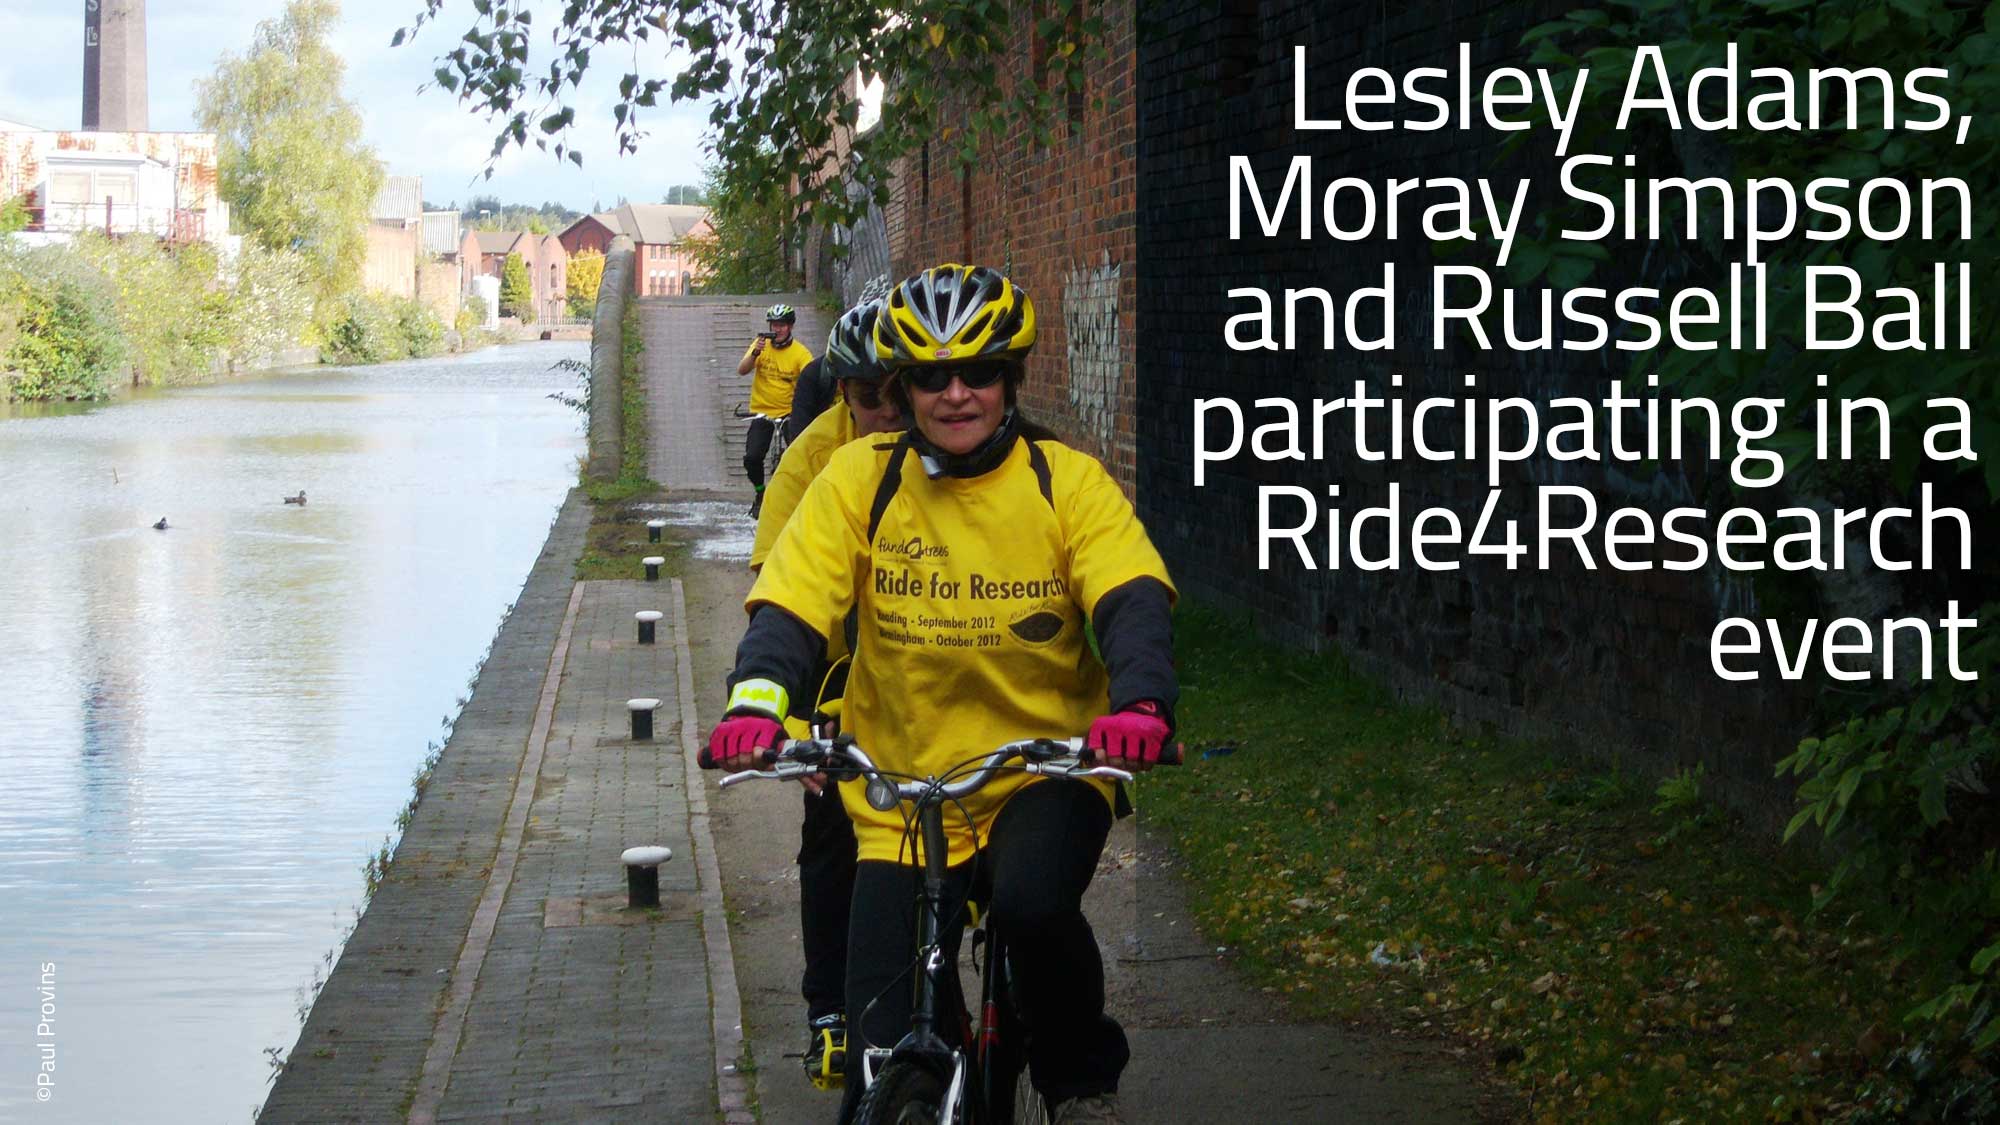 Lesley, Moray Simpson and Russell Ball participating in a Ride4Research event